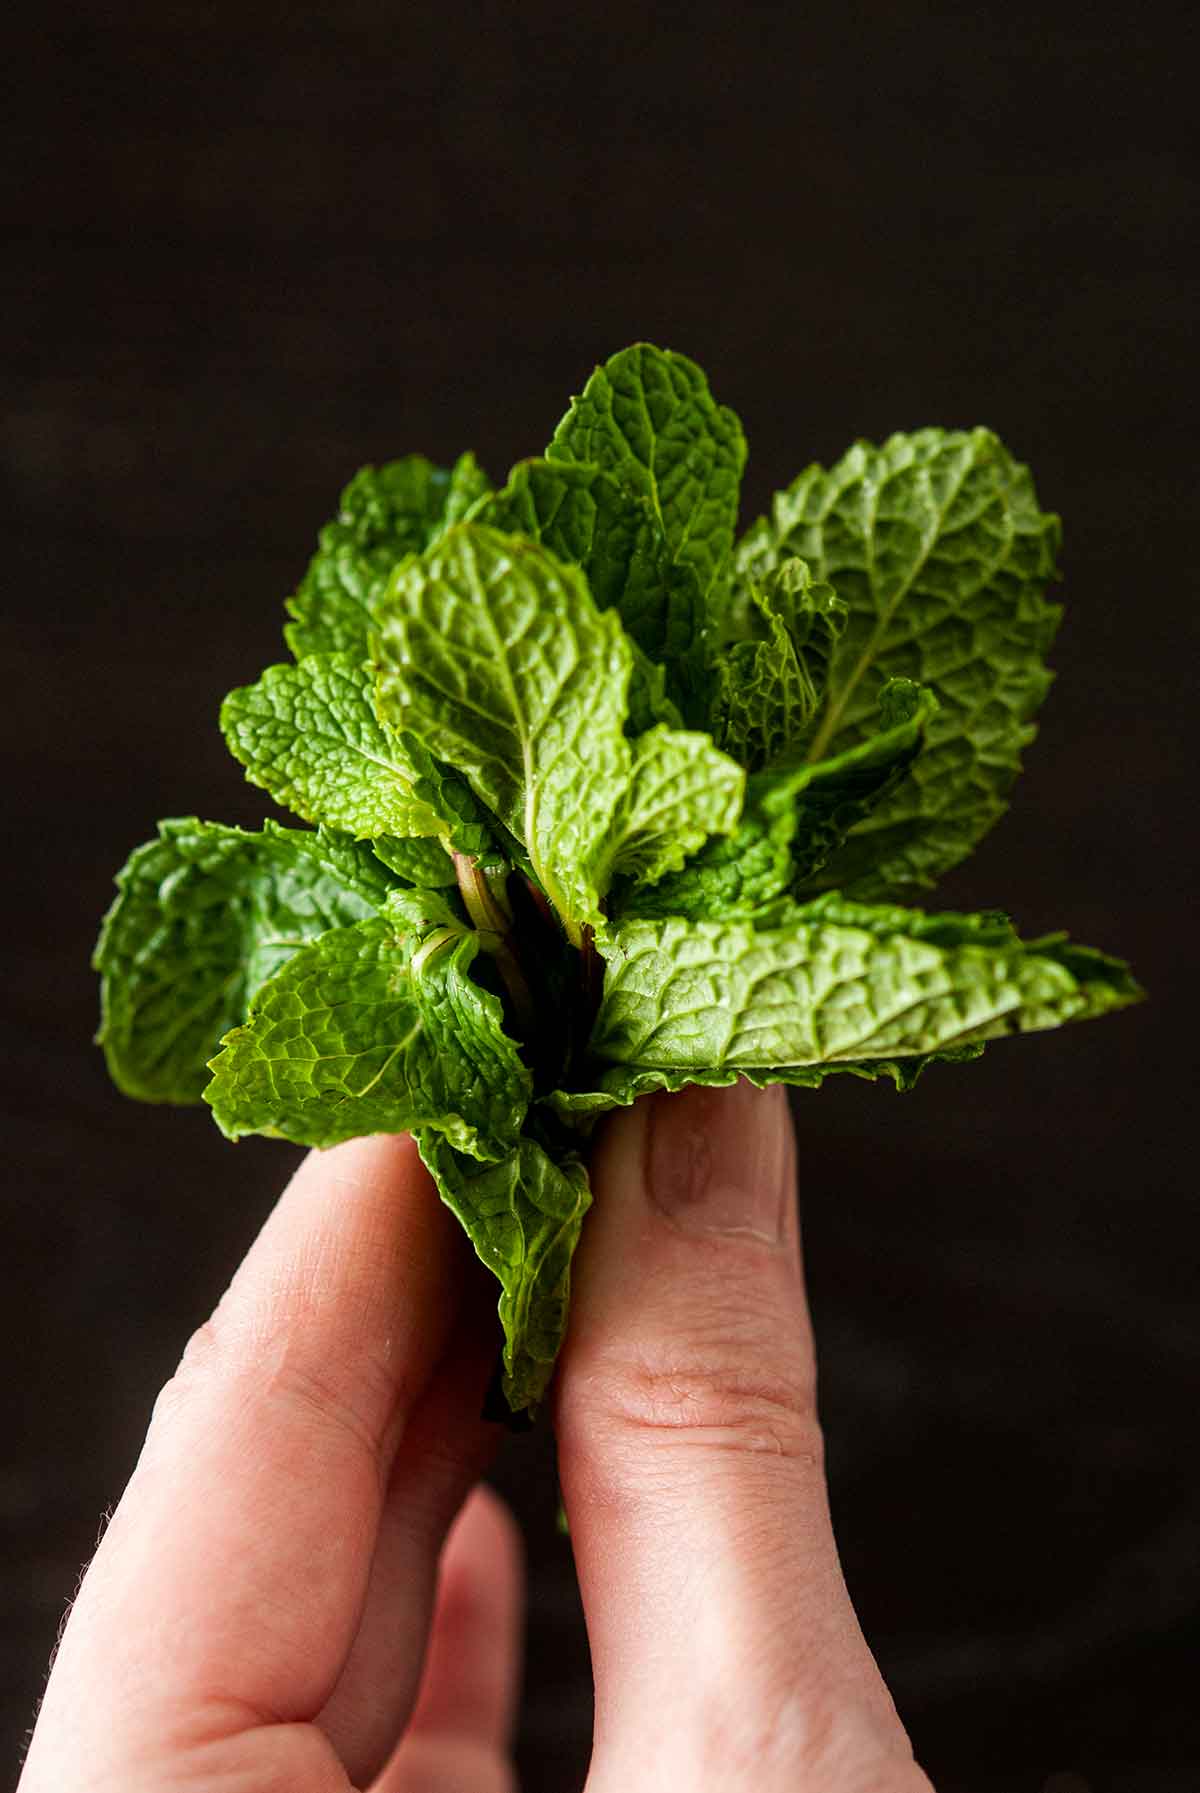 Fingers holding a small amount of mint.